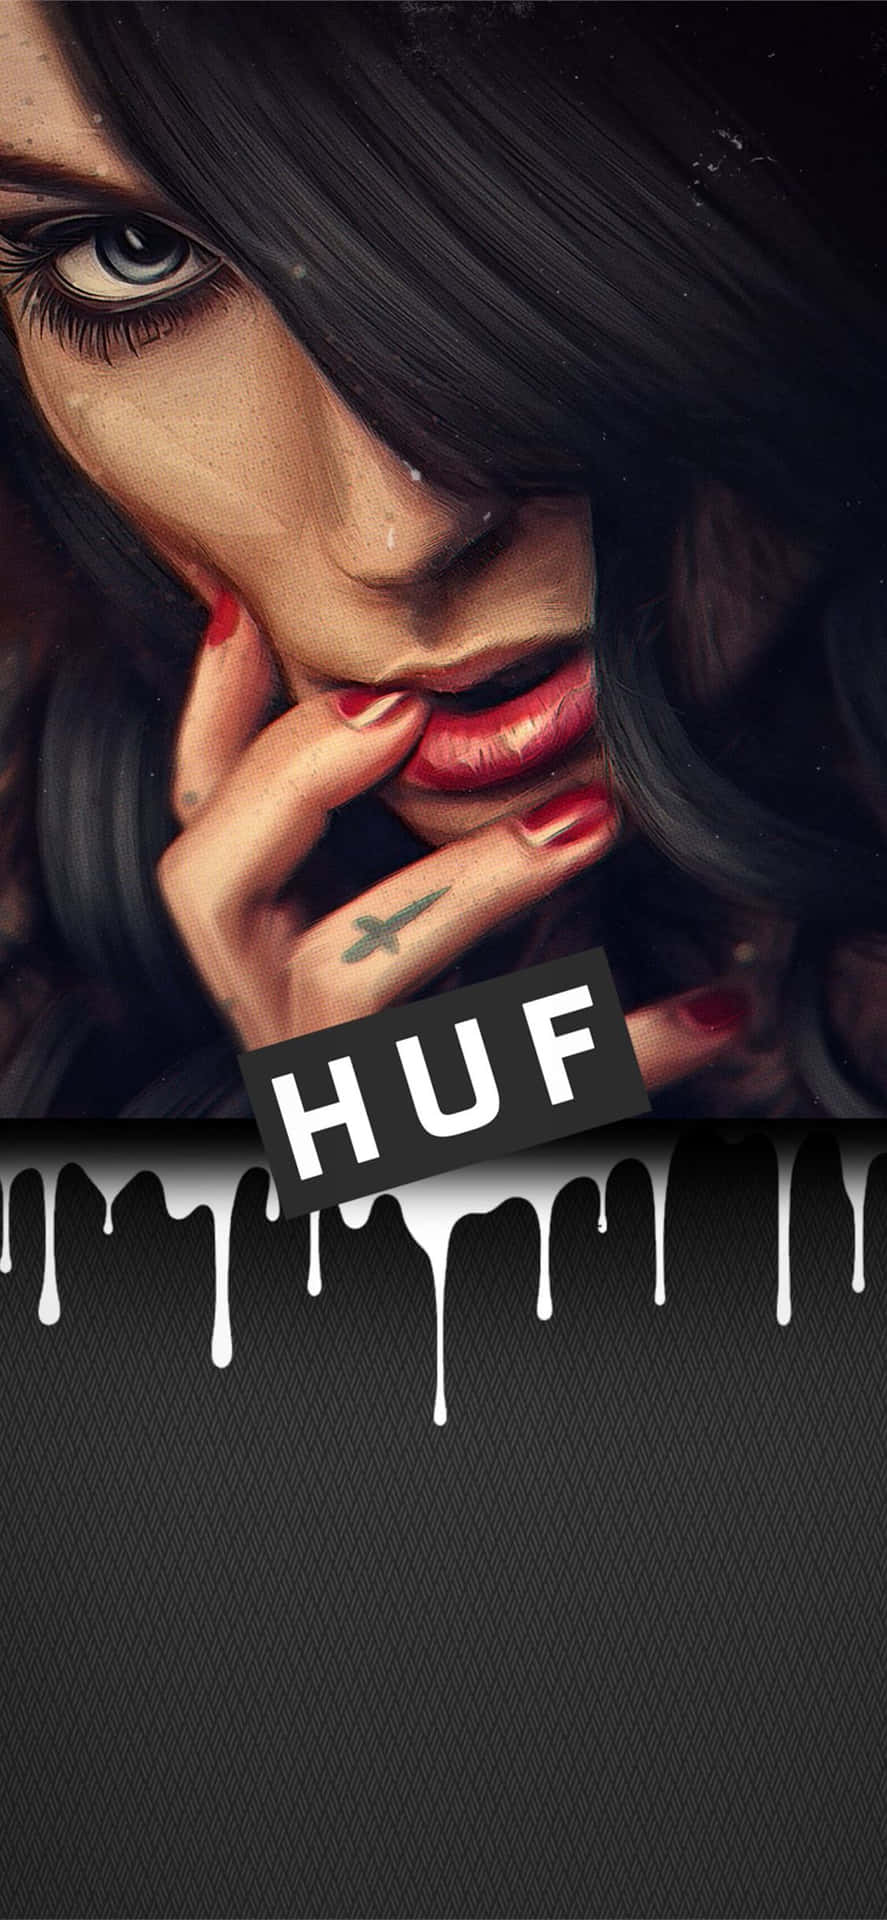 Huf - A Woman With Black Hair And A Black Background Wallpaper